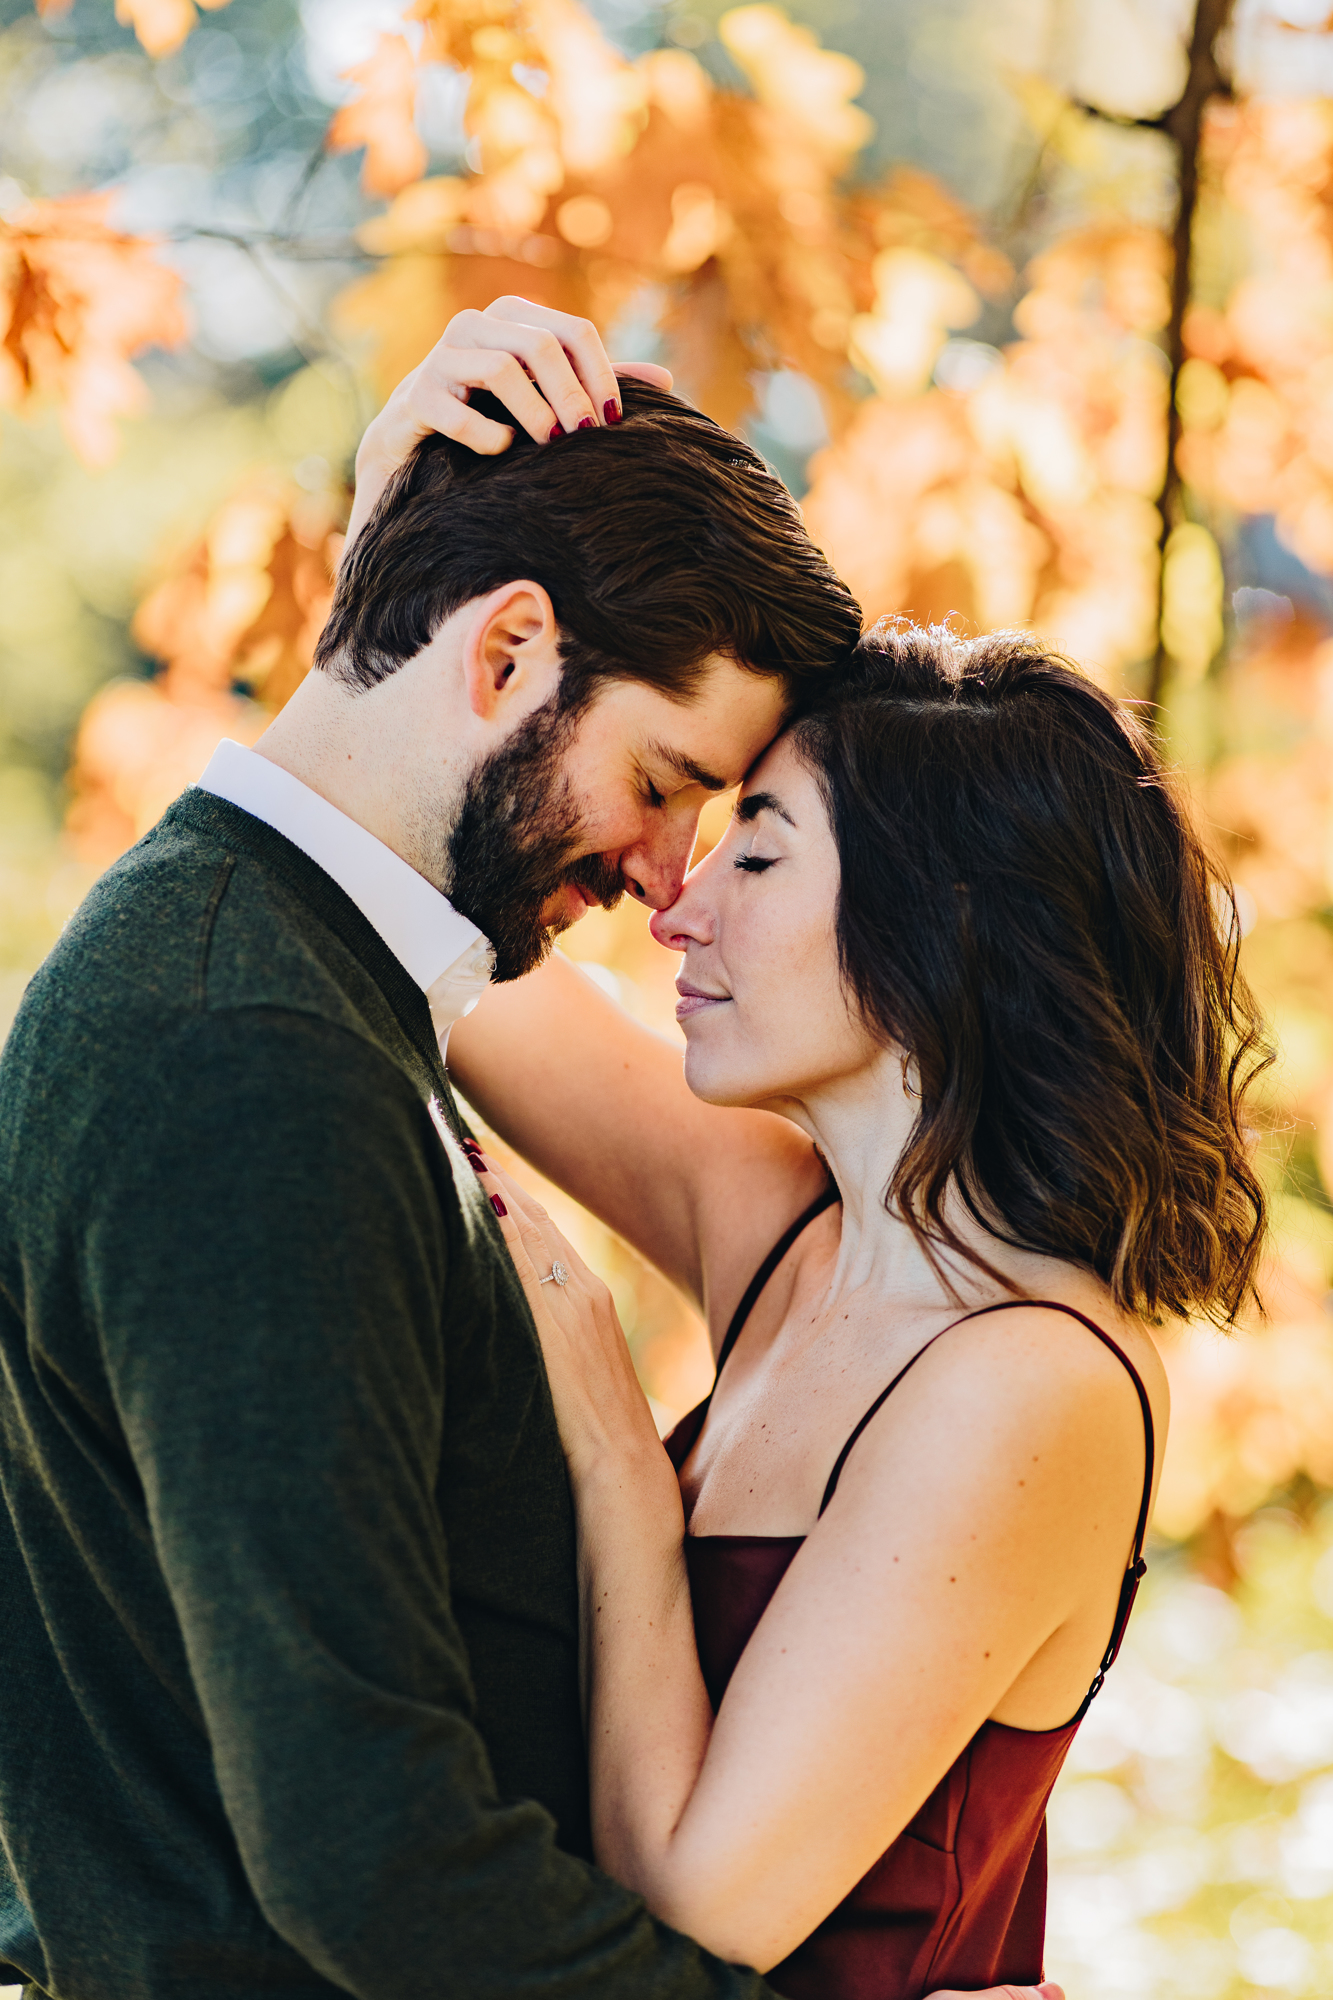 Intimate Central Park Engagement Photos in Fall